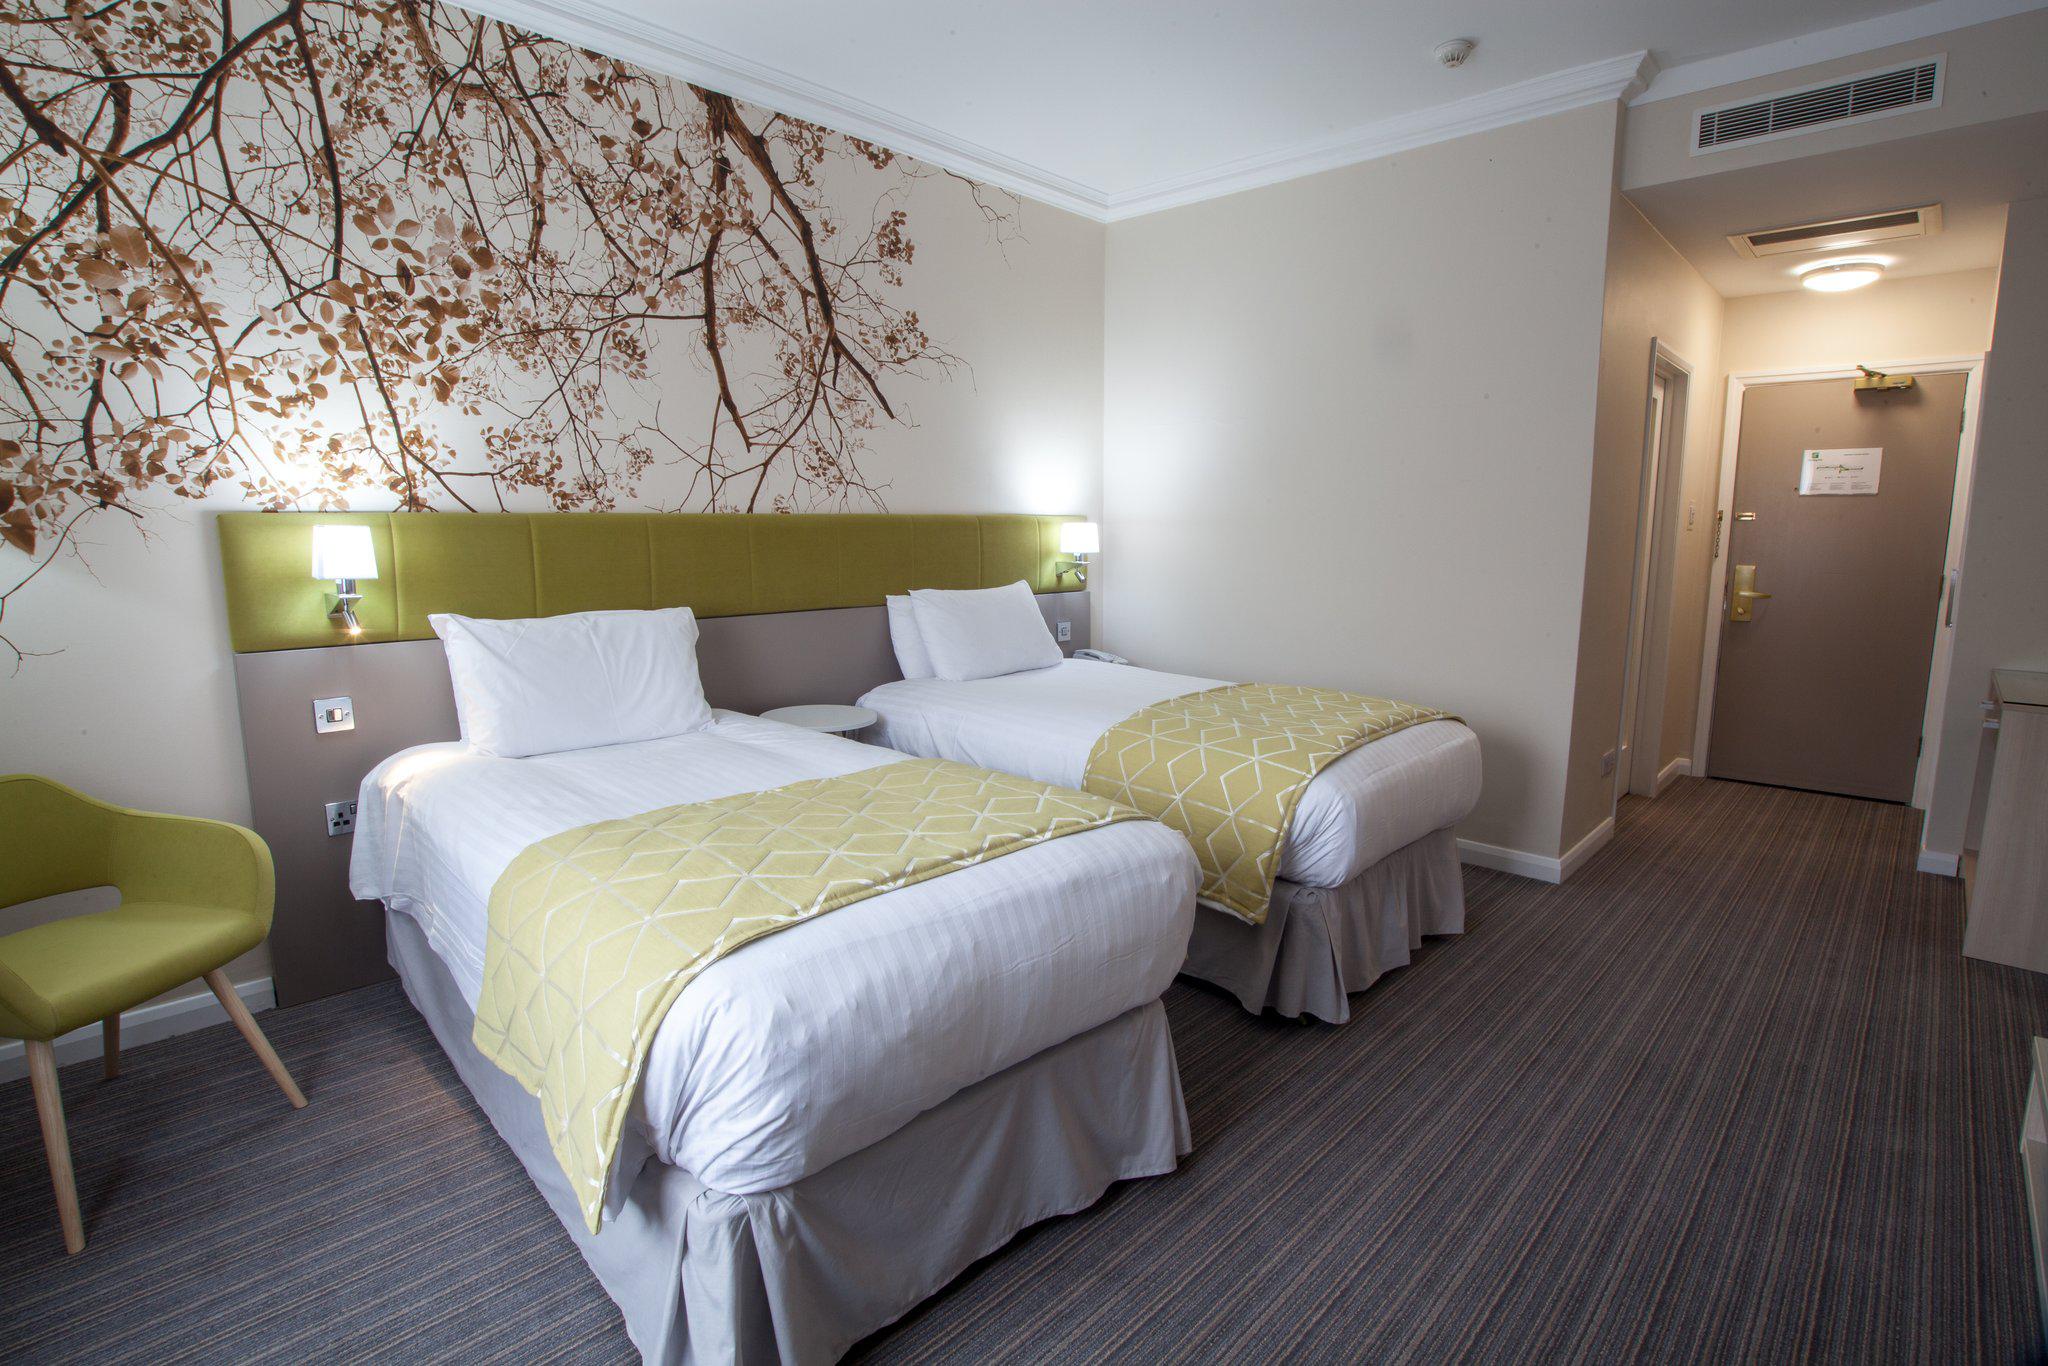 Holiday Inn Corby - Kettering A43, an IHG Hotel Corby 01536 401020